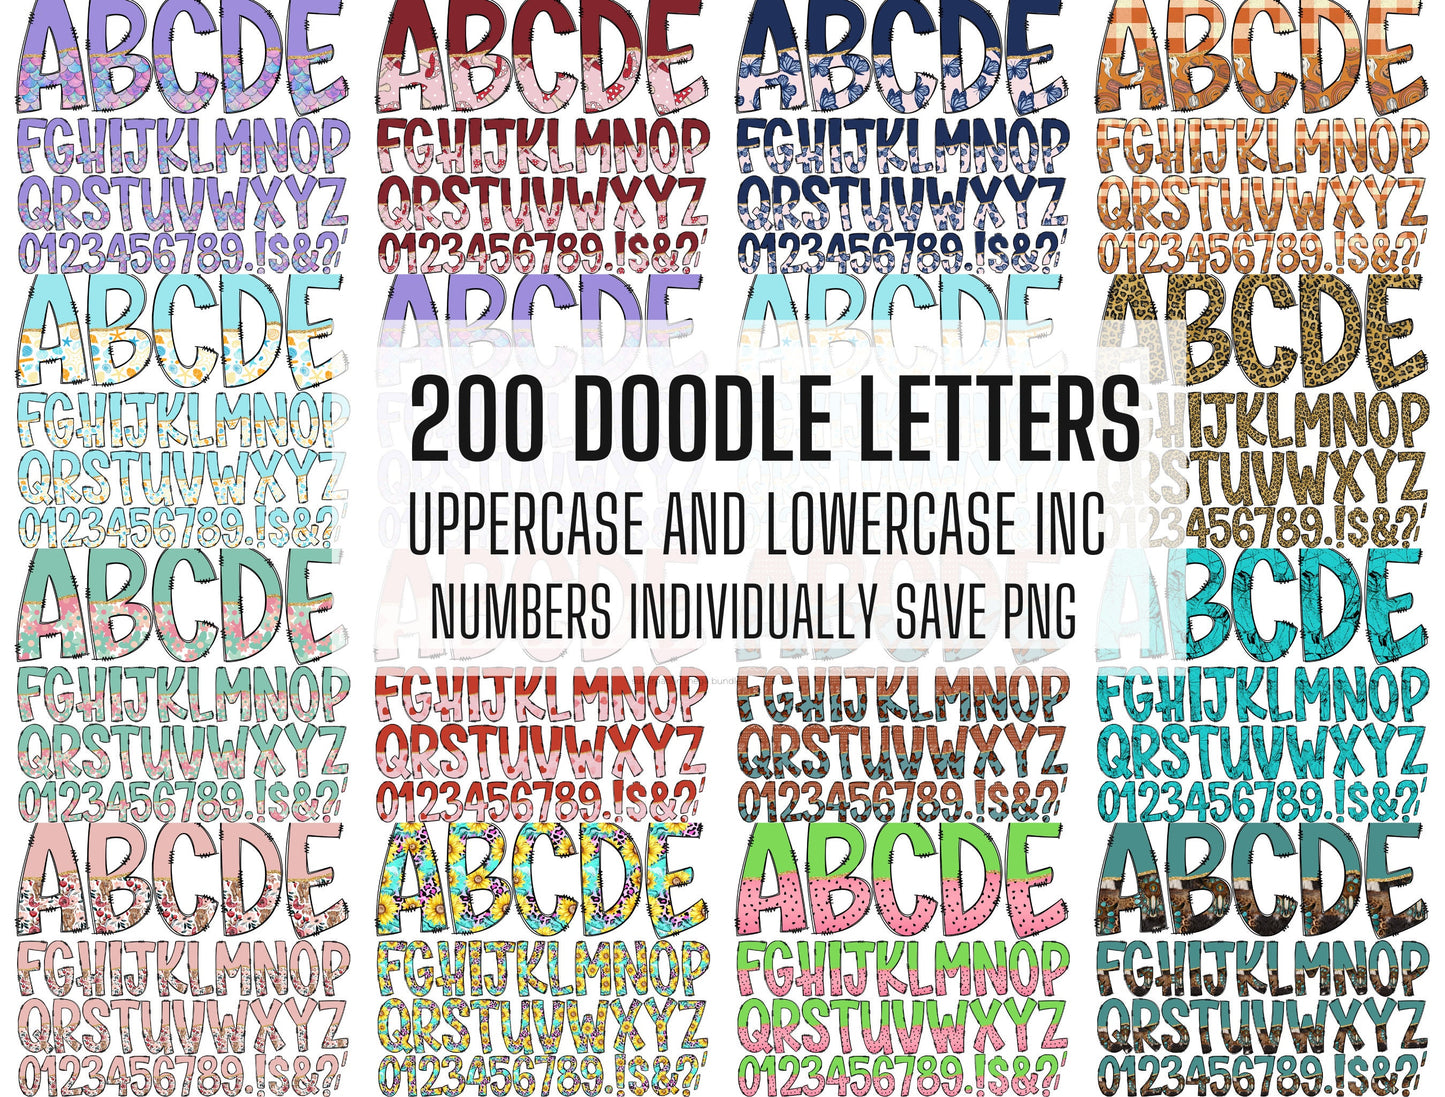 200 Doodle Letters, MEGA BUNDLE, Uppercase & Lowercase, Entire Doodle Alphabet, Numbers, Individually Saved PNG, pack, Sublimation letters